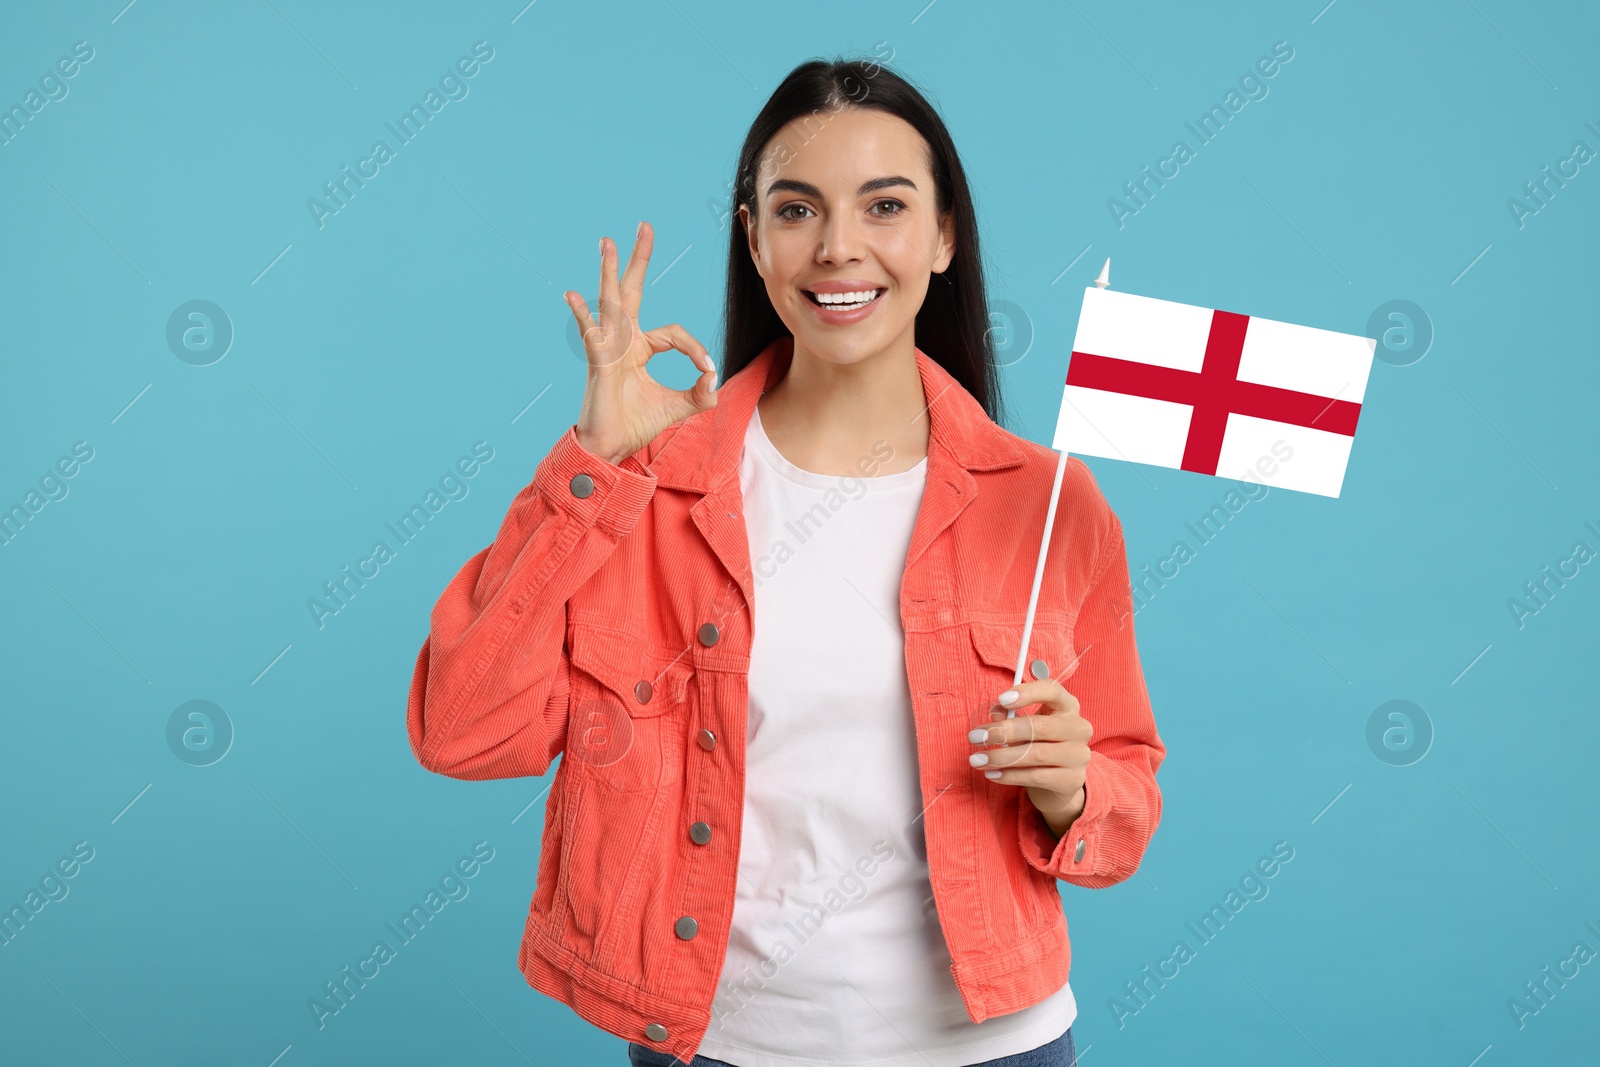 Image of Happy young woman with flag of England showing OK gesture on light blue background